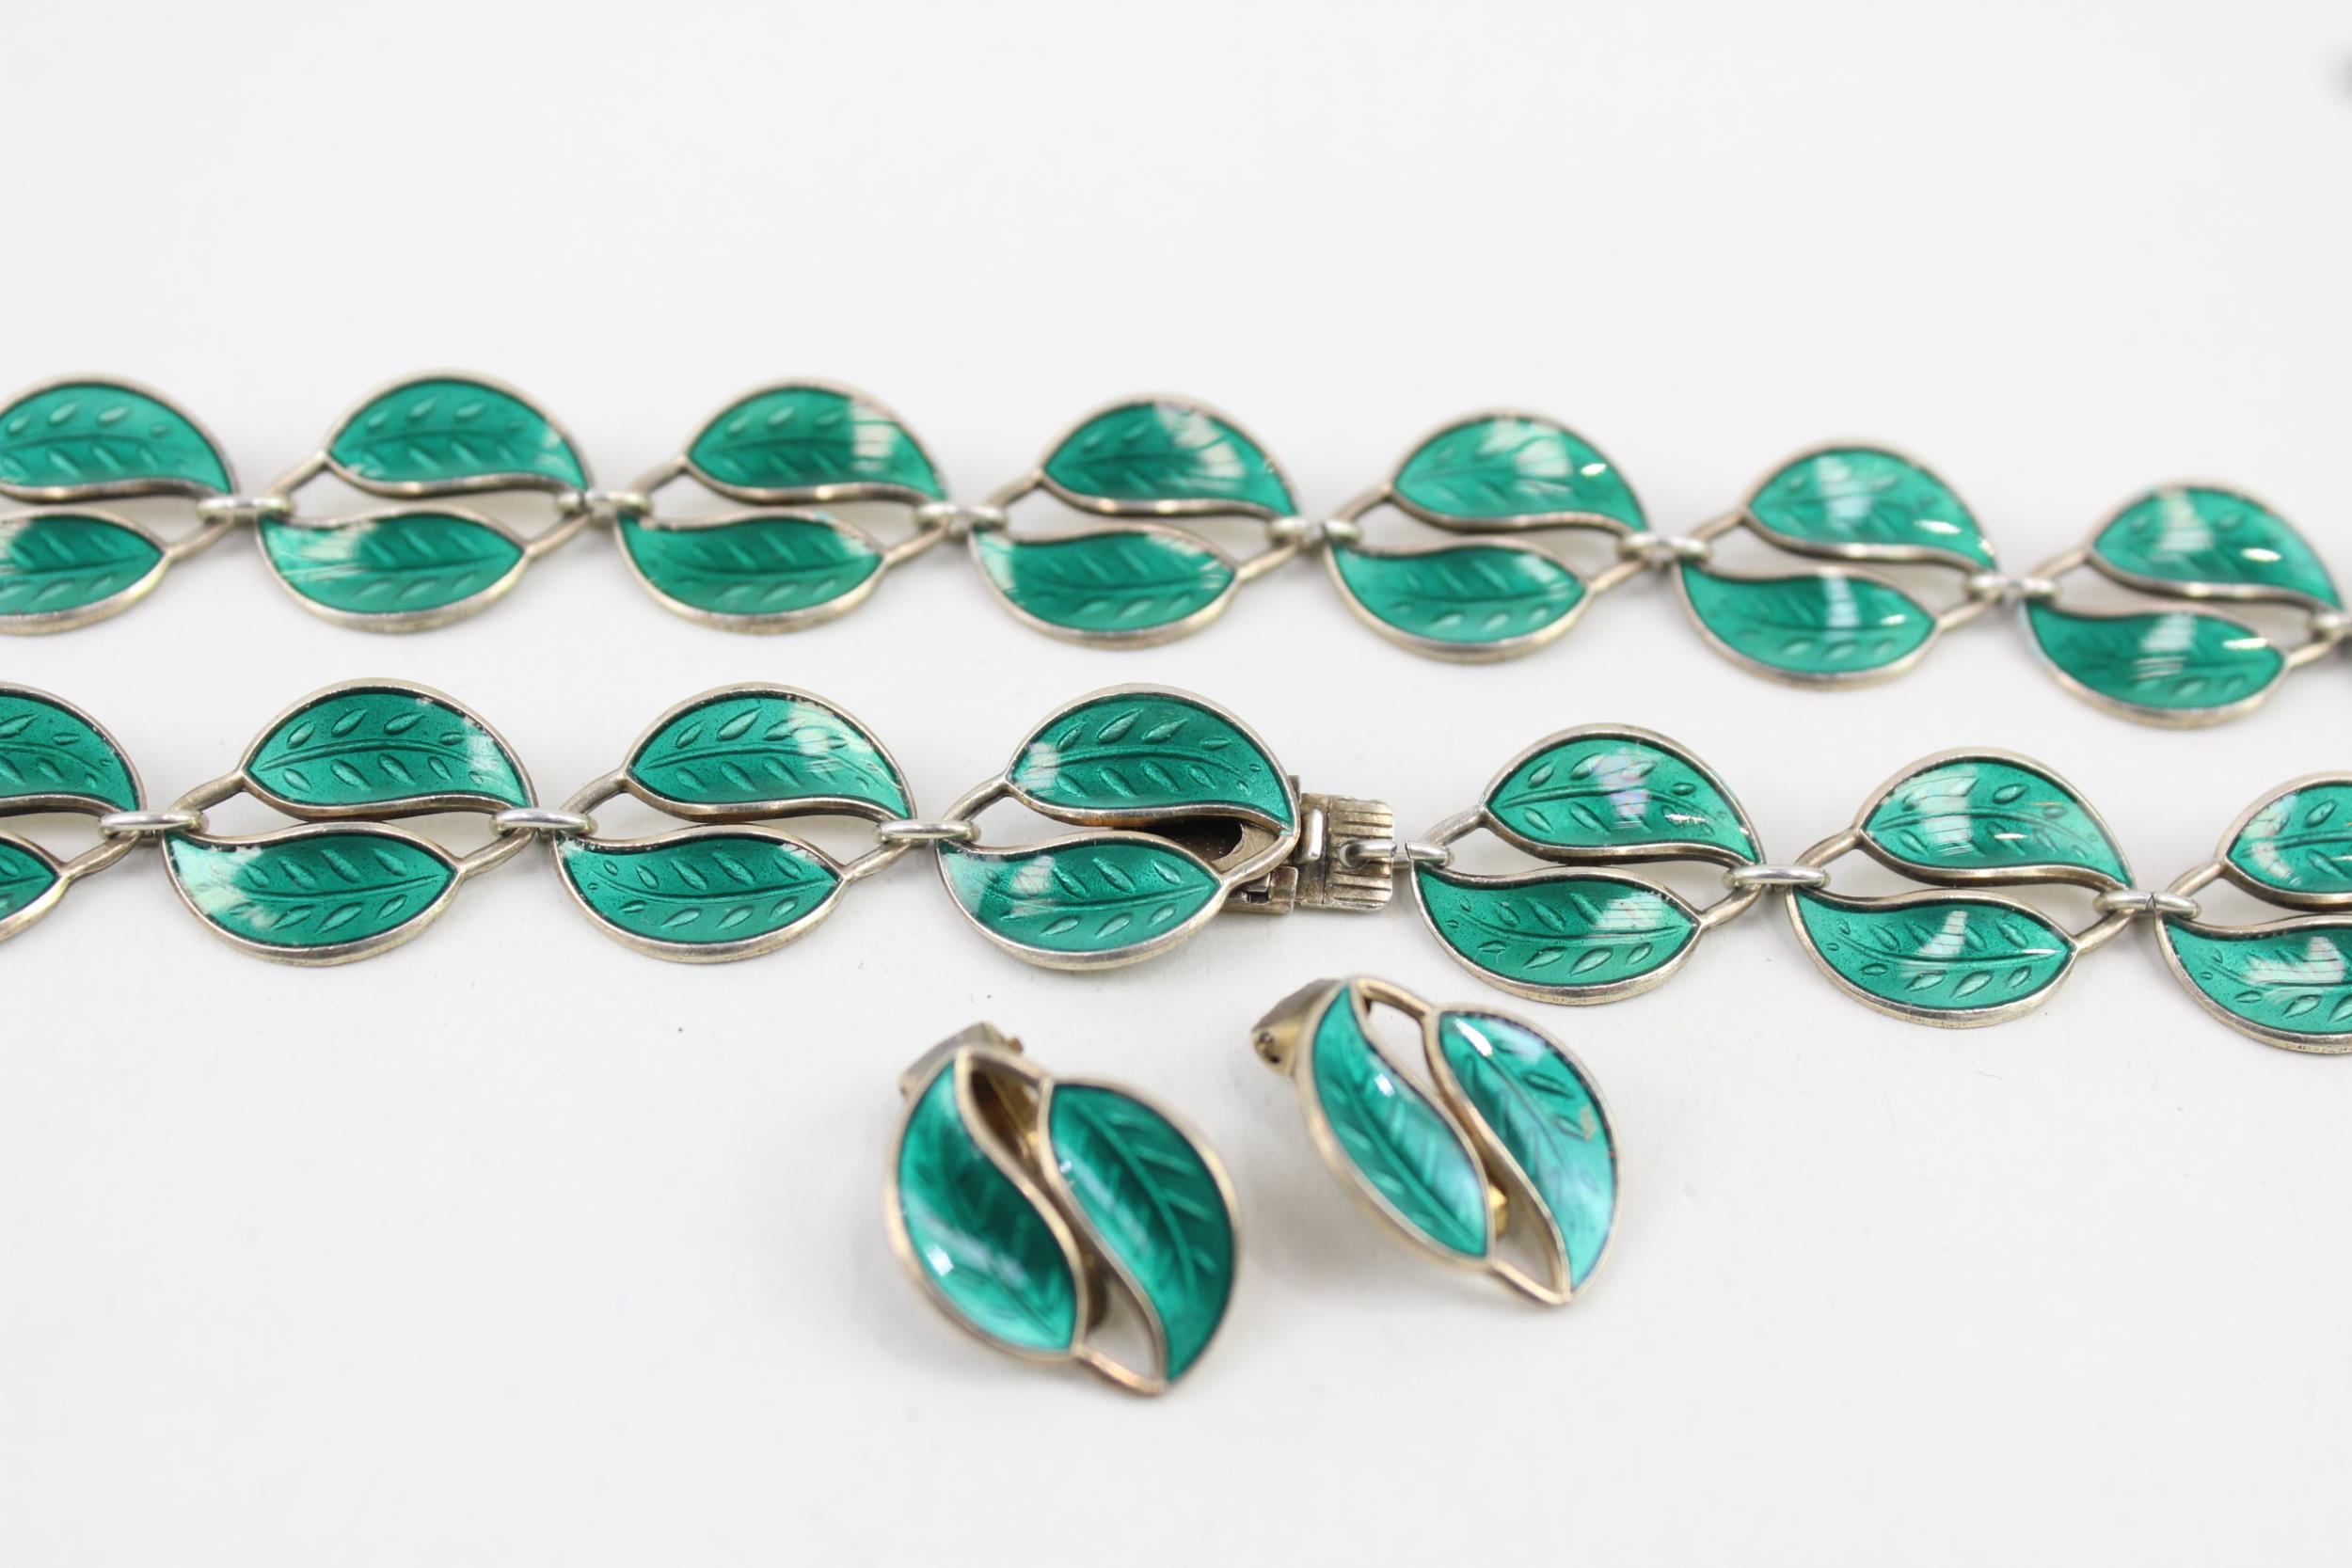 Silver enamel necklace and clip on earrings jewellery set by David Anderson (30g) - Image 5 of 8